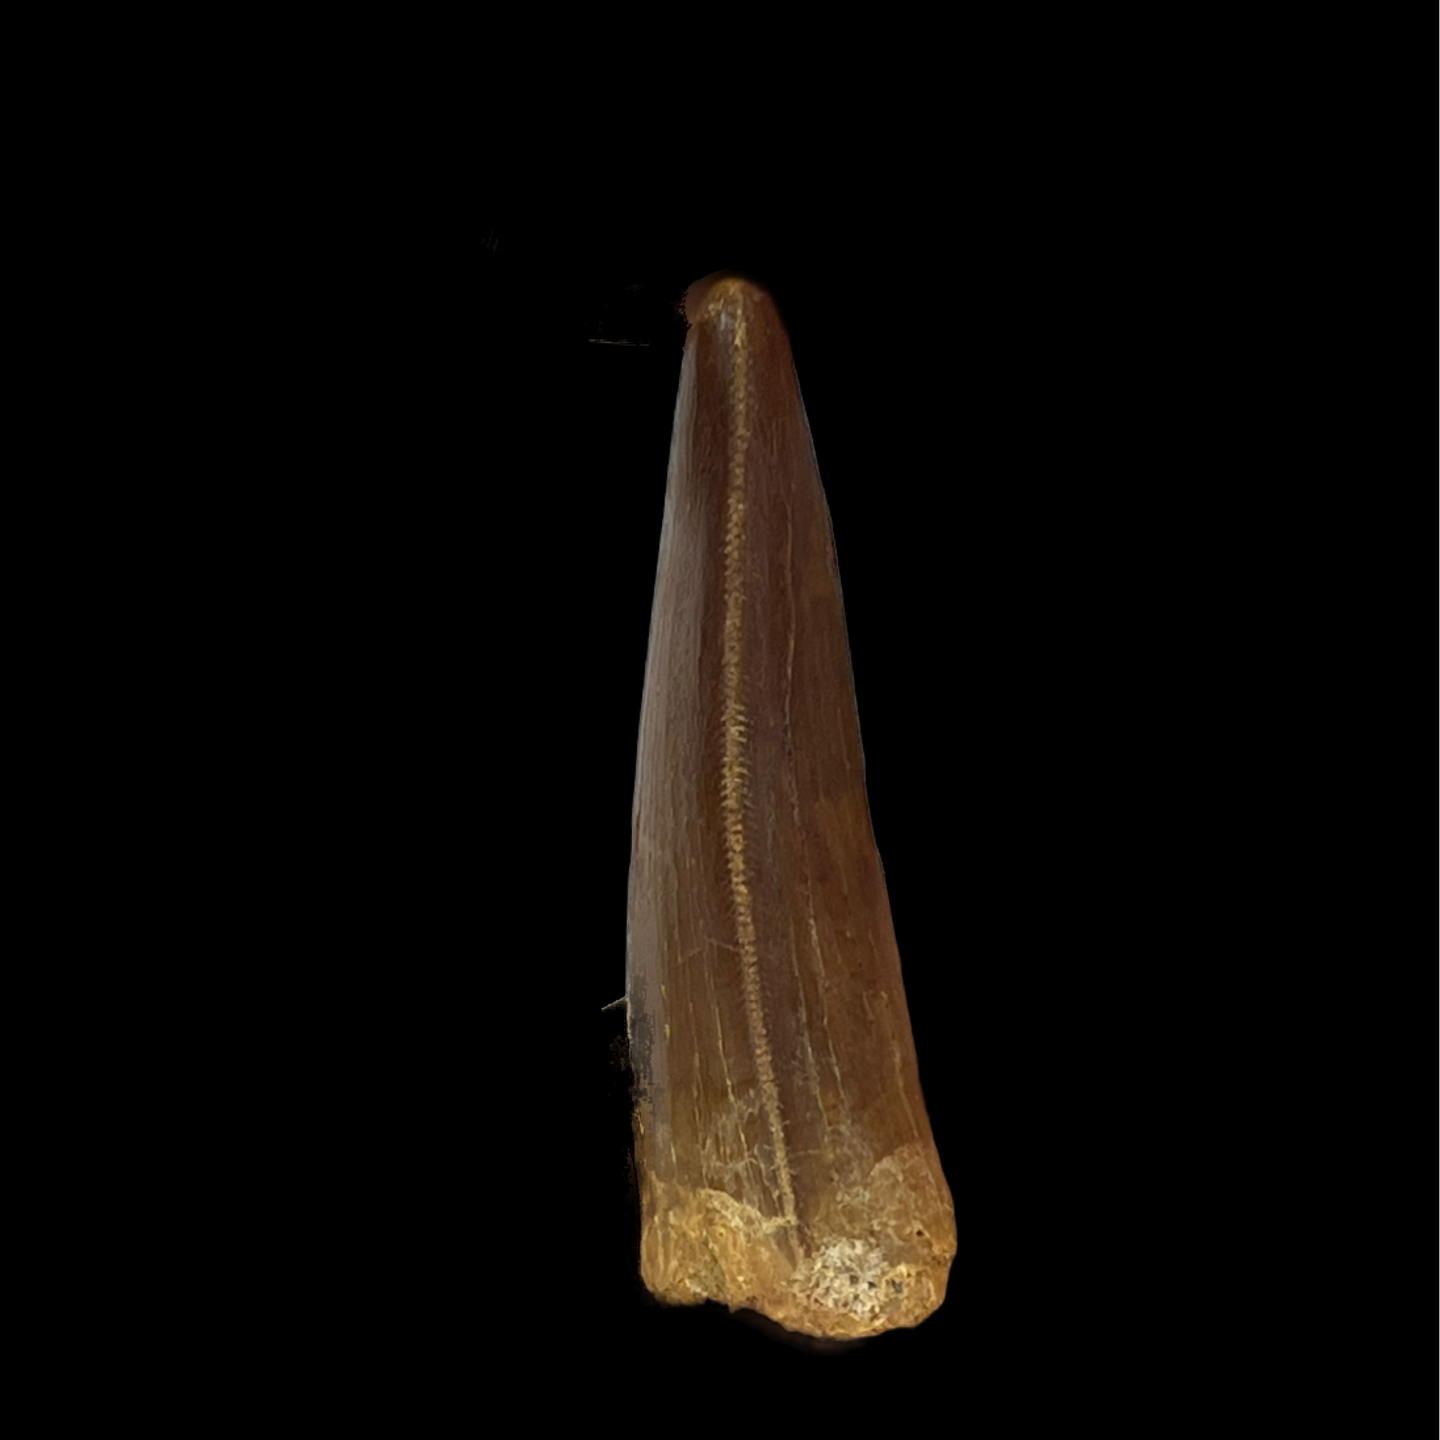 Carcharodontosaurus Tooth 02 (2 in)